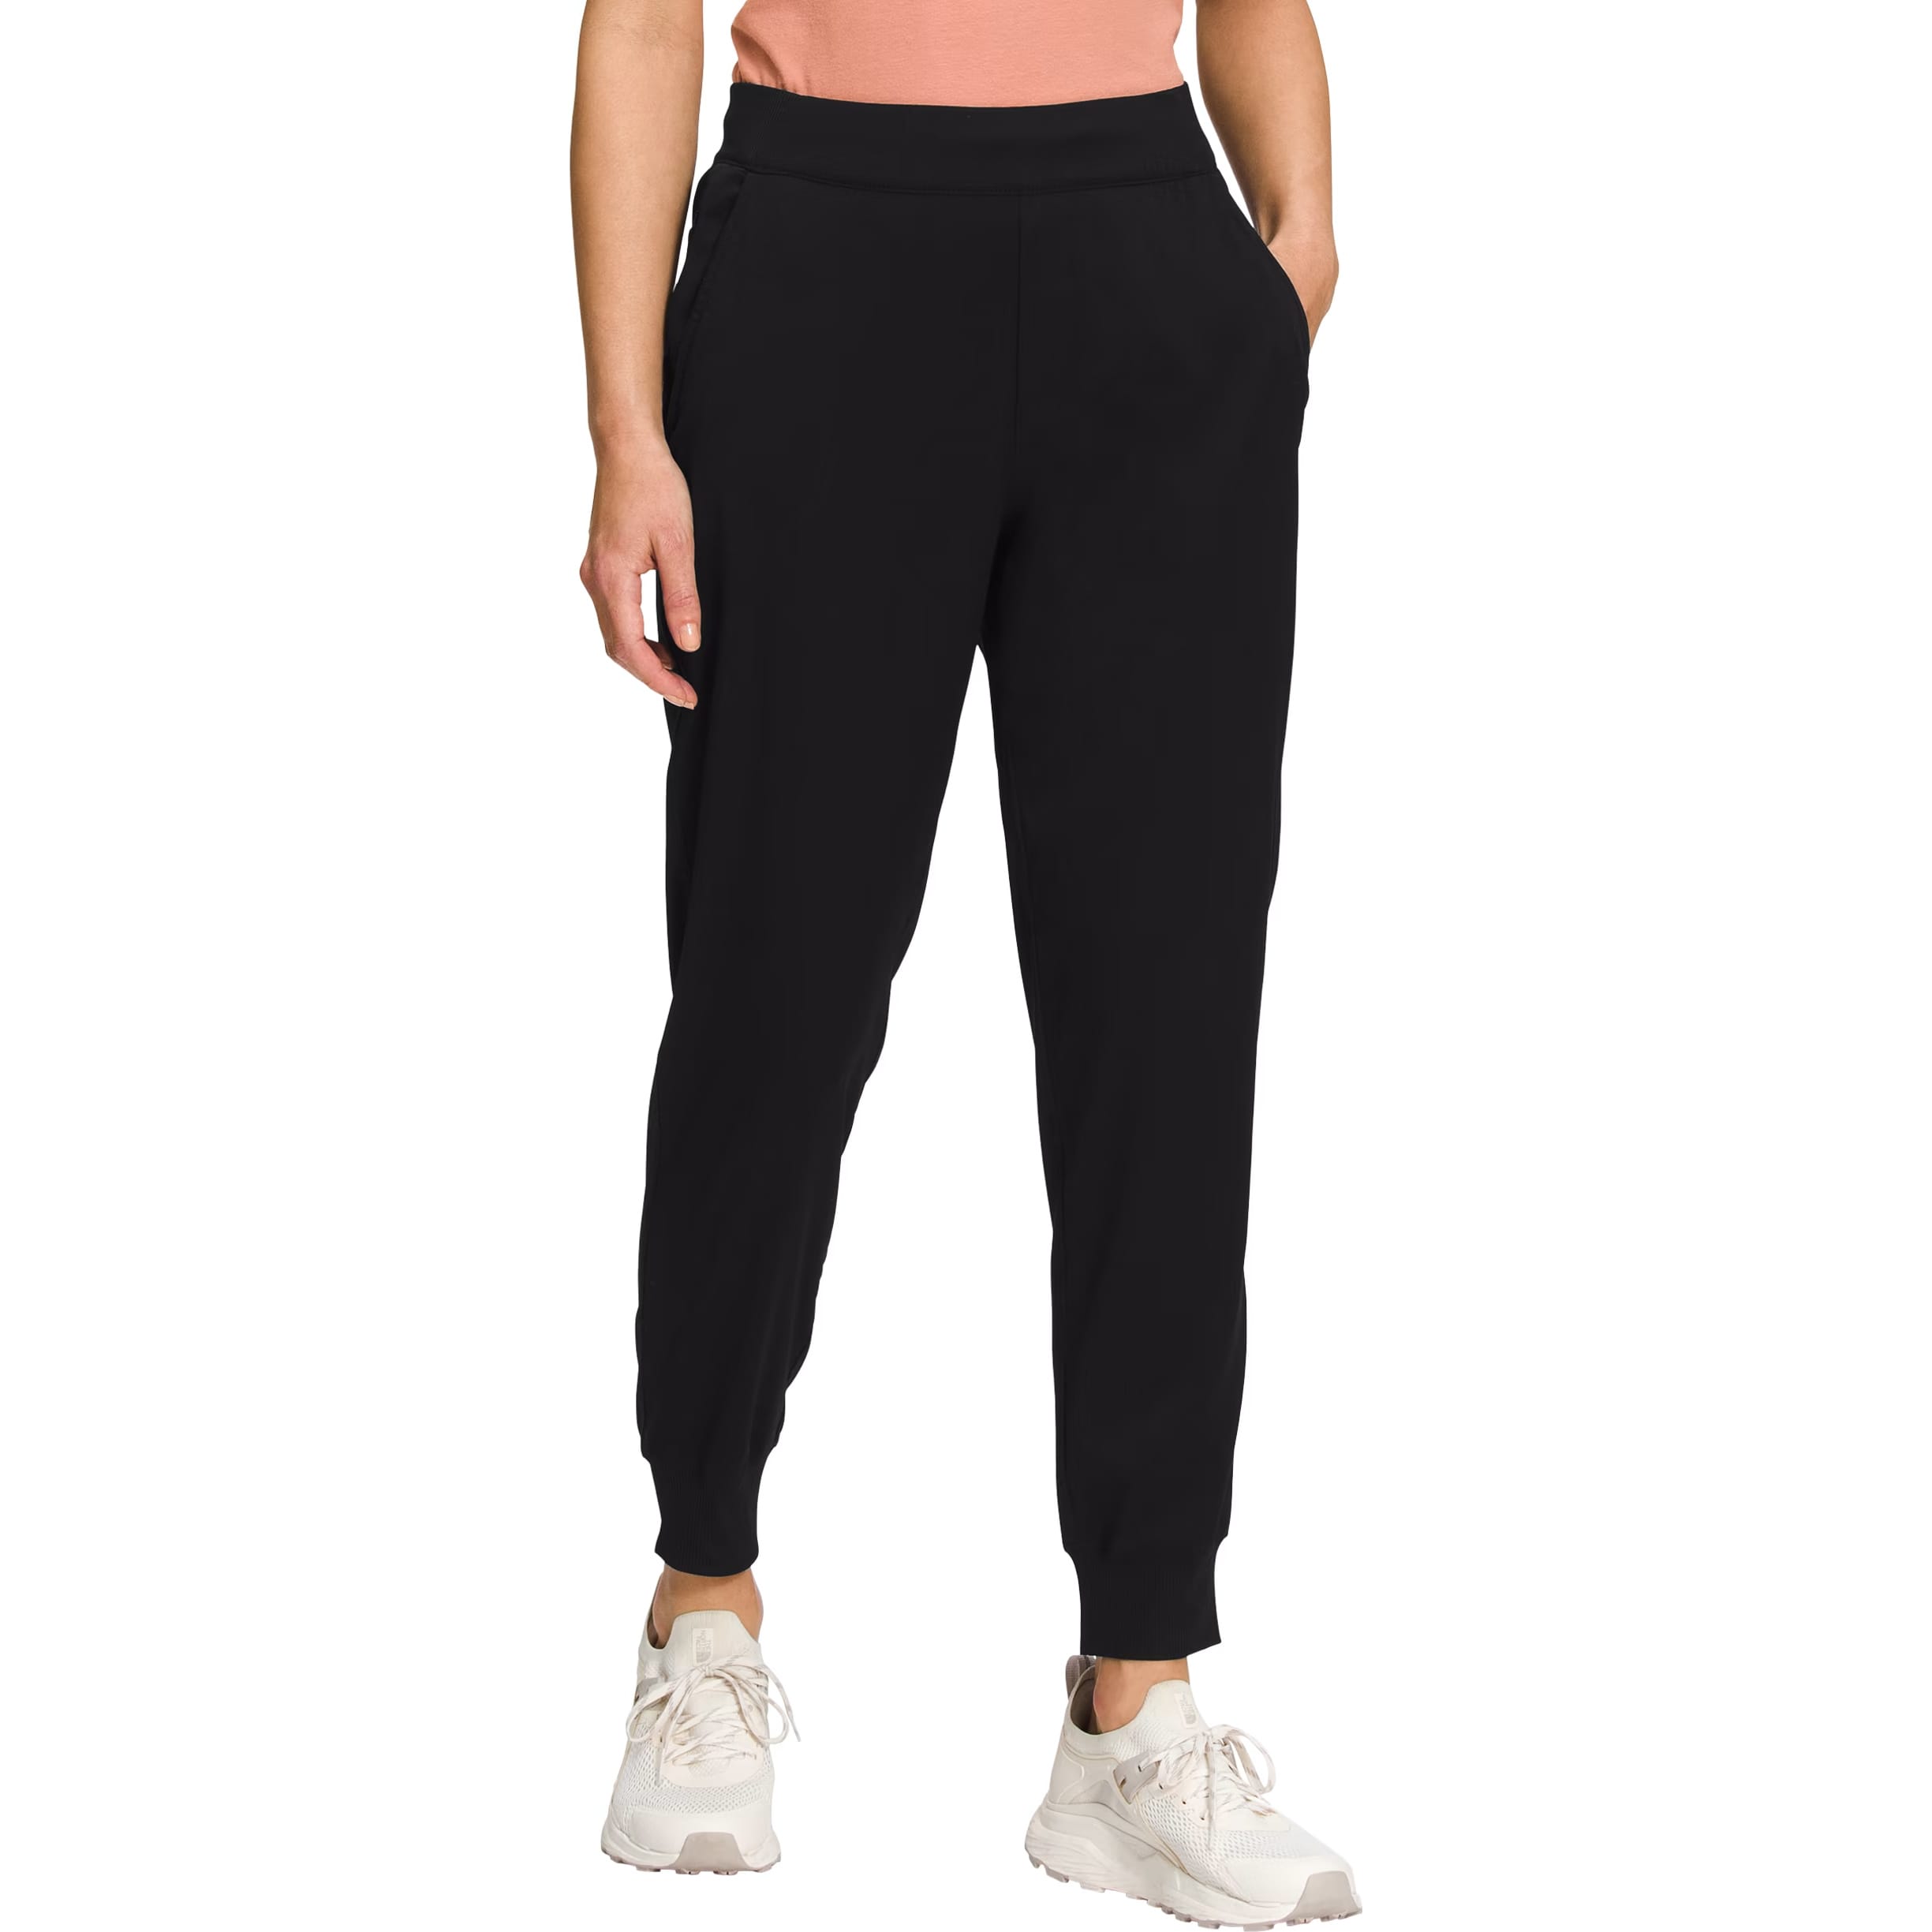 Carhartt on X: These #Carhartt Force Knit Utility #leggings are a